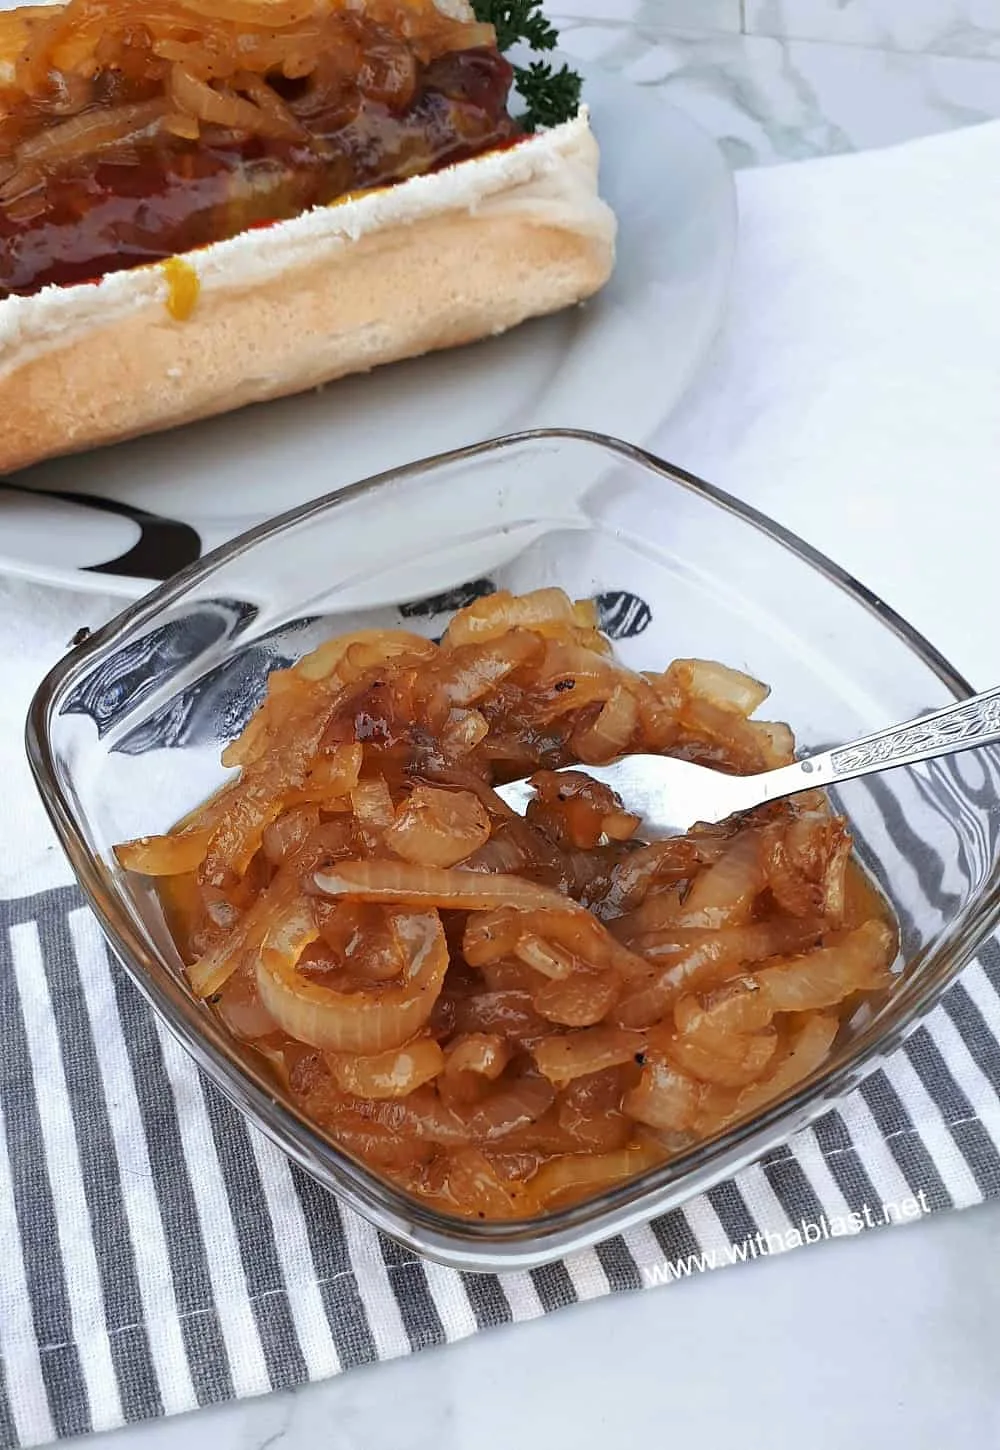 Quick Homemade Balsamic Caramelised Onions is perfect to serve with steaks, sandwiches, hot dogs, burgers. Also delicious on the side with a hearty breakfast !